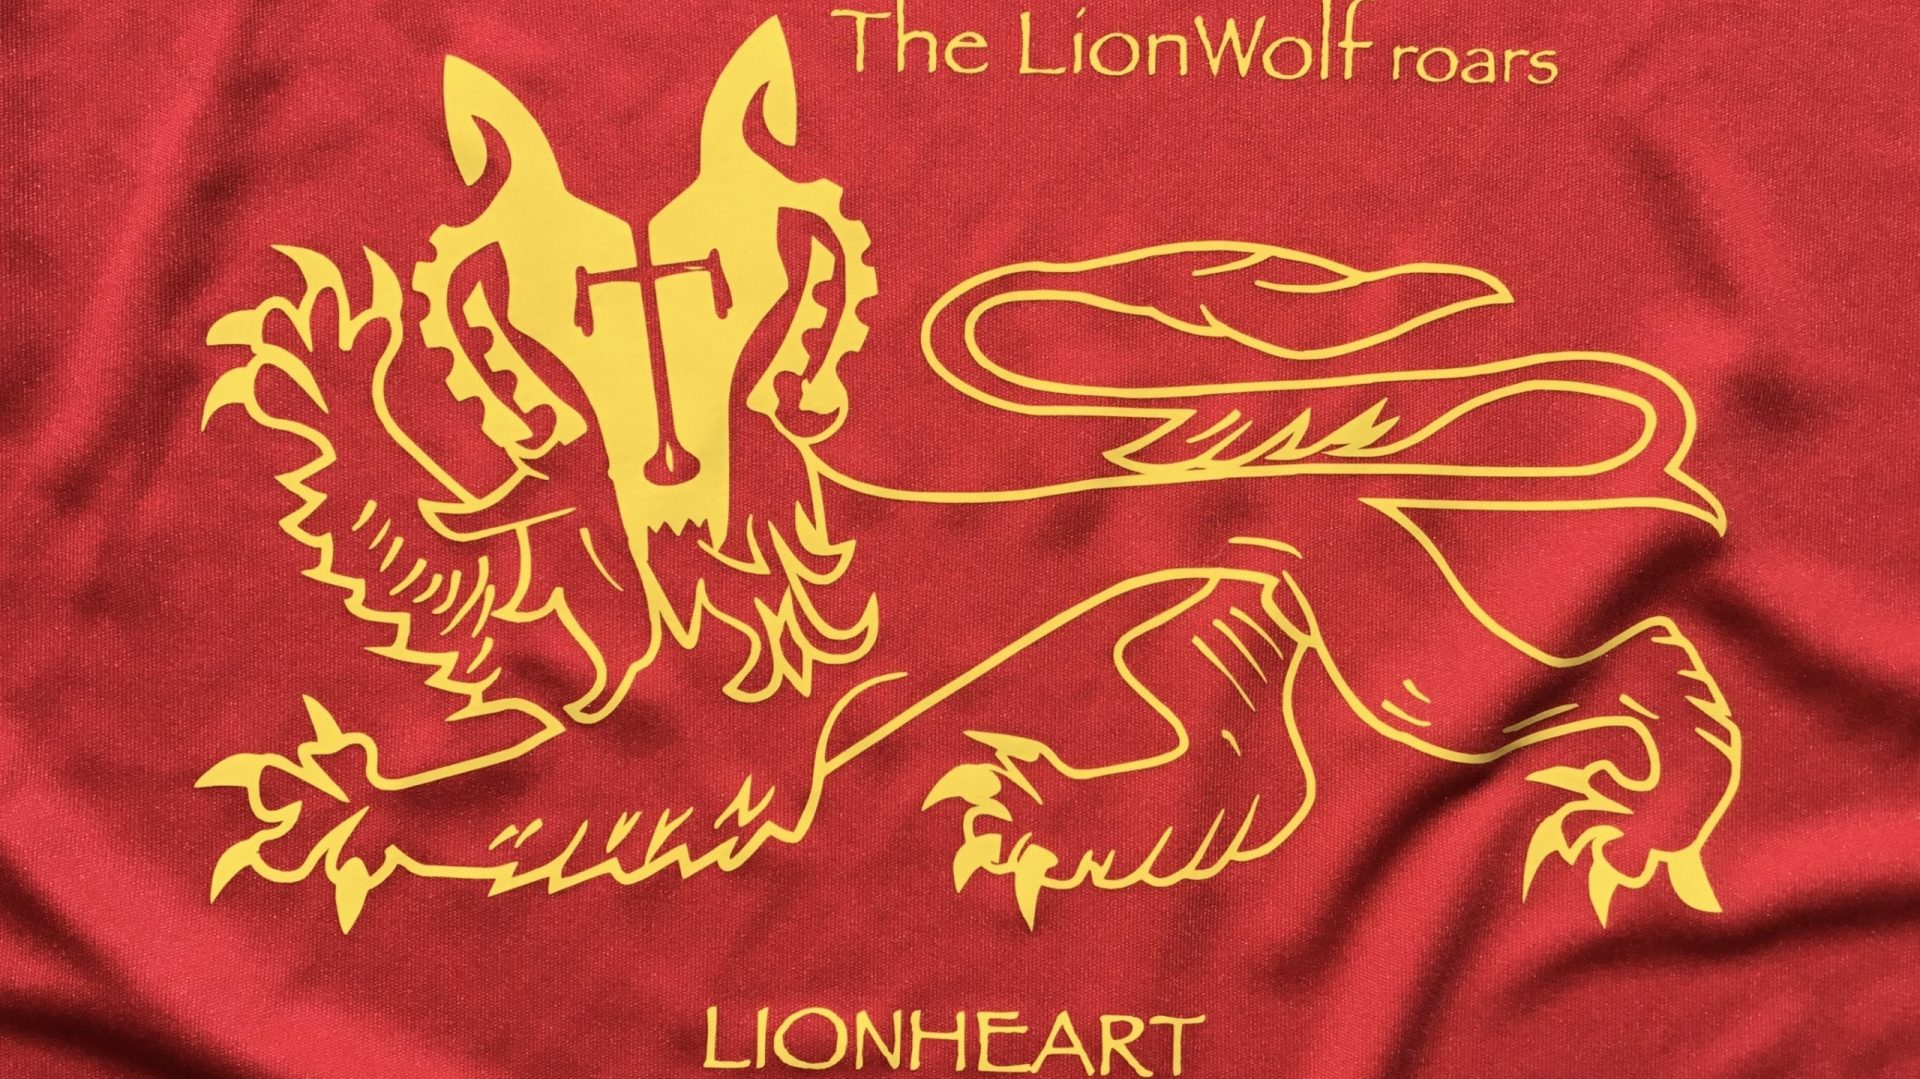 Cycletooth Meets Lionheart!